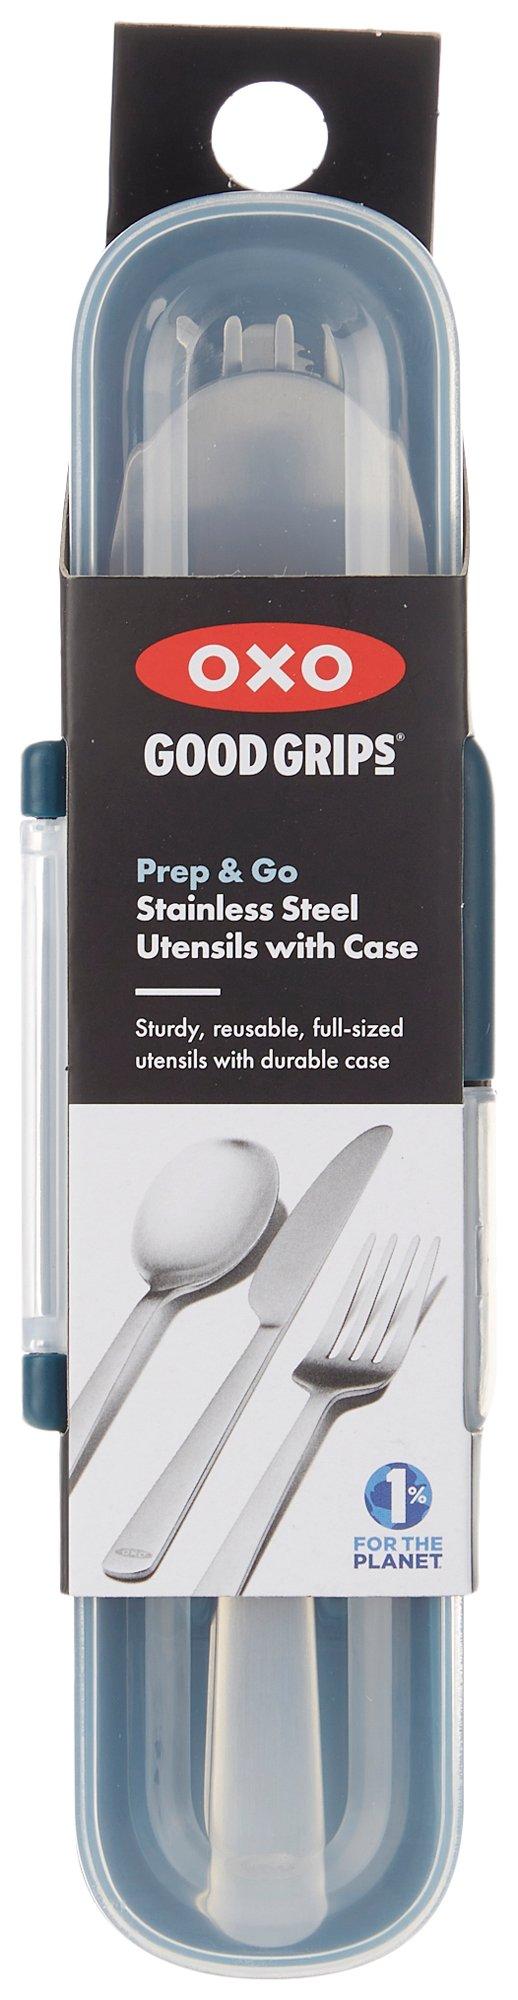 OXO Prep & Go Stainless Steel Utensils With